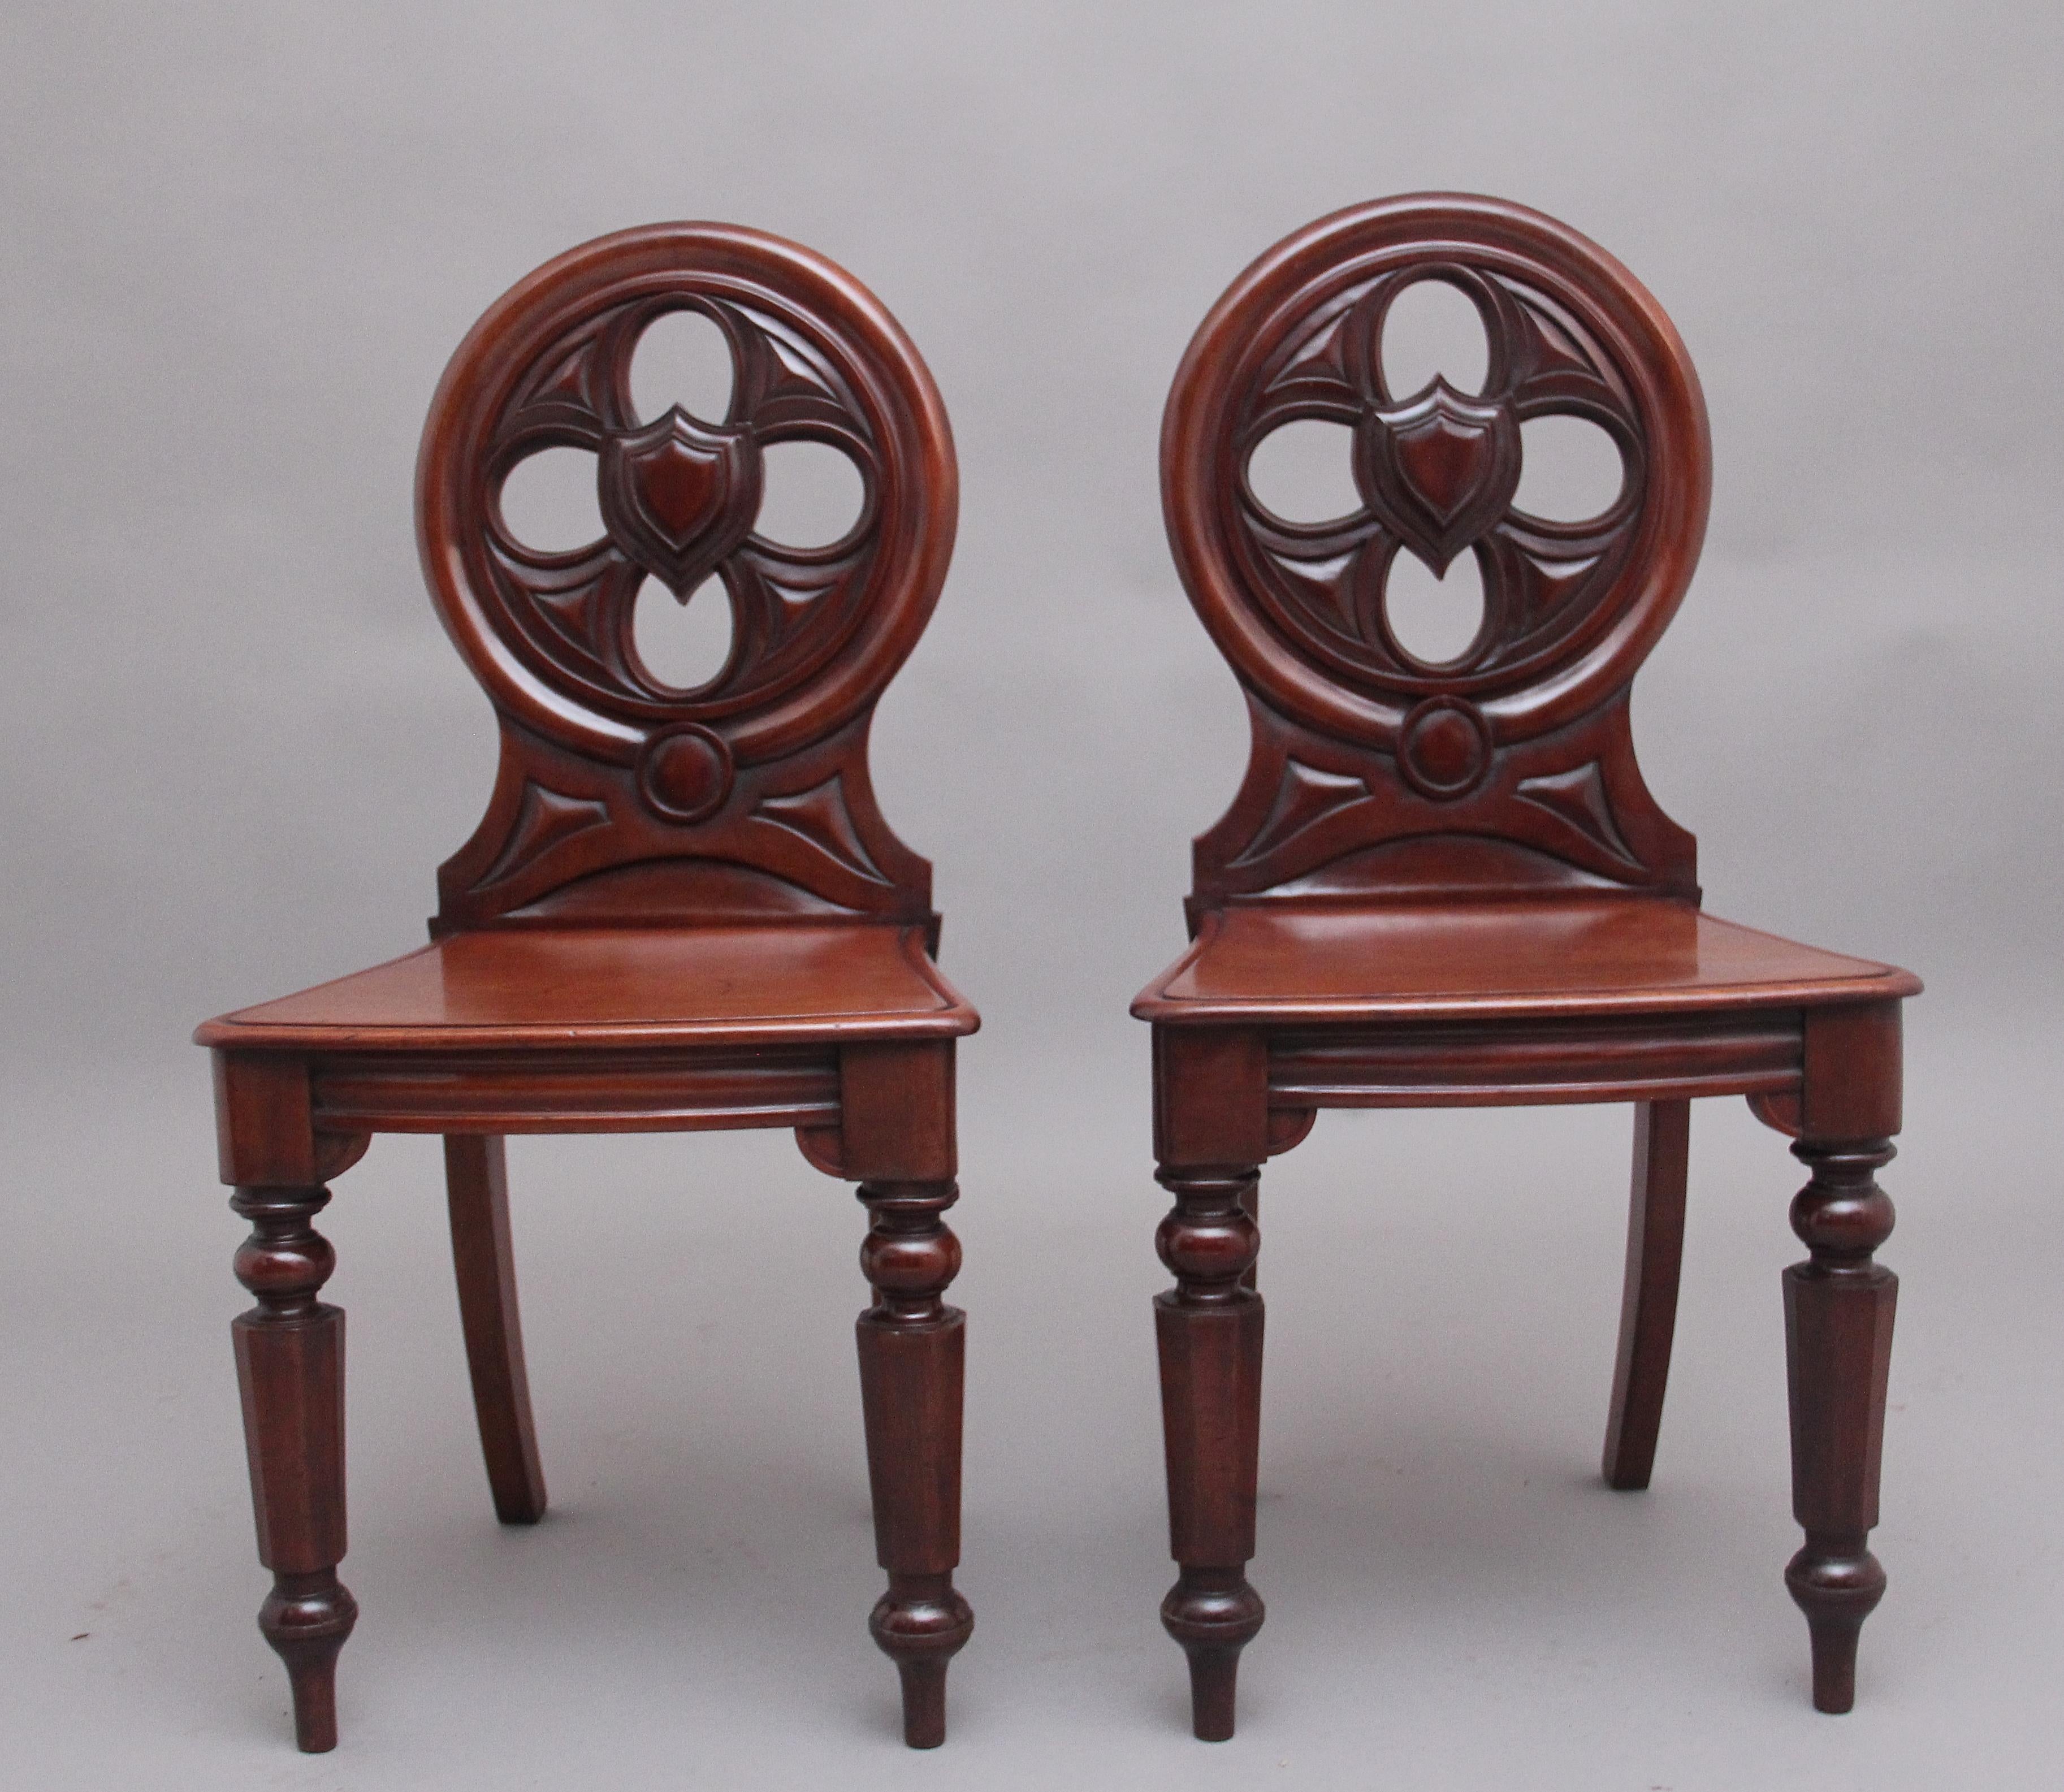 A pair of mid 19th Century mahogany hall chairs, having circular shaped and moulded backs and centred by shield reserves, hard seats with nice figuration, supported on out swept rear legs and turned front legs. Circa 1840.
  